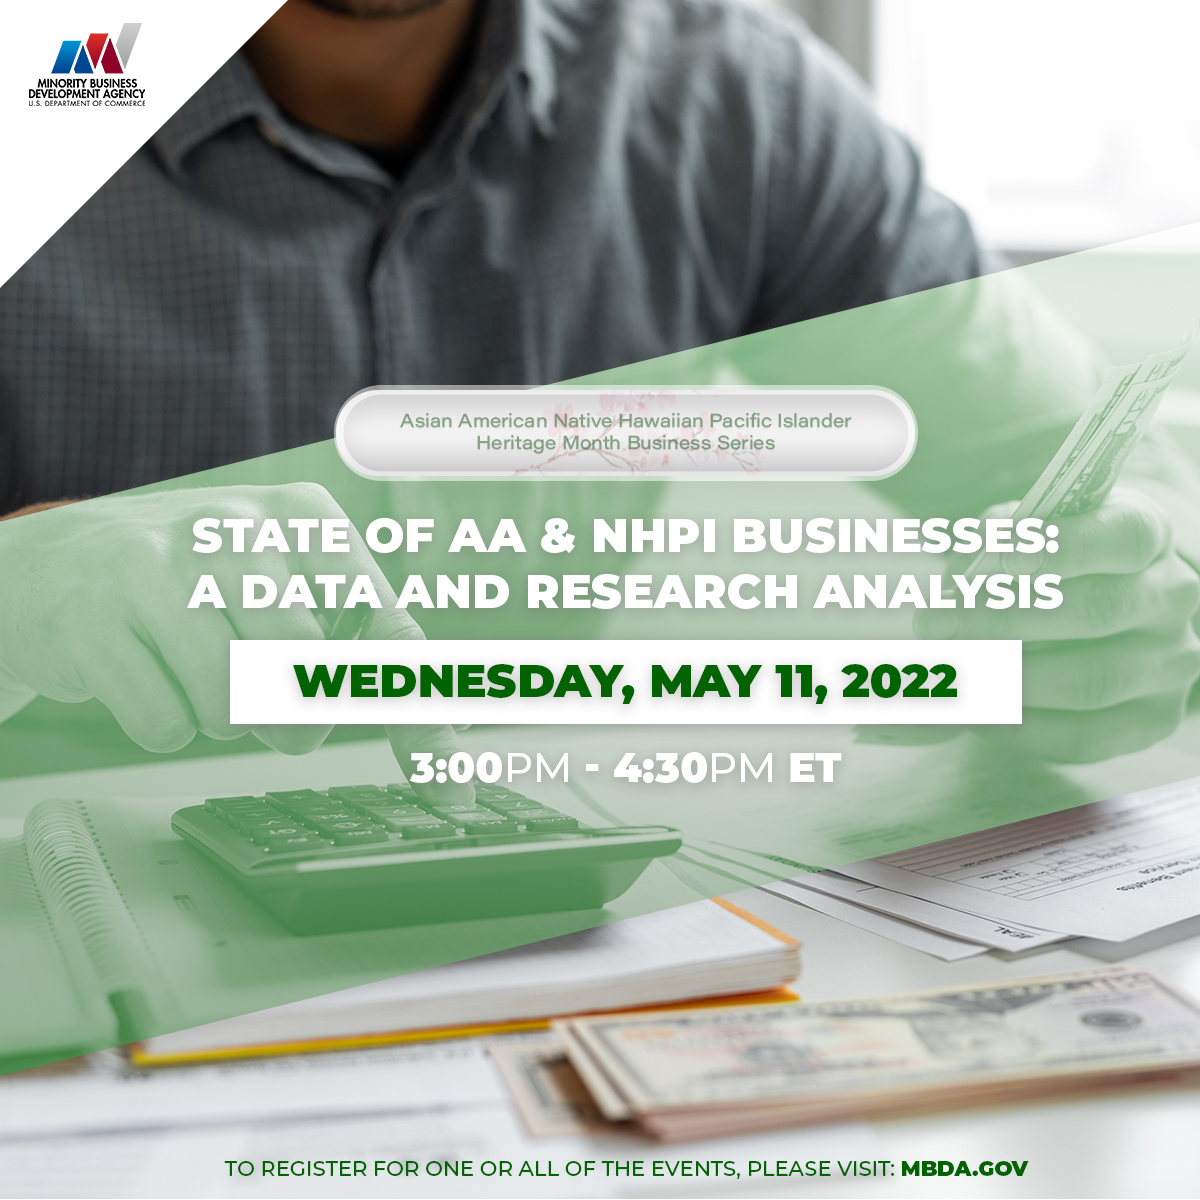 State of AA & NHPI Businesses: A Data and Research Analysis